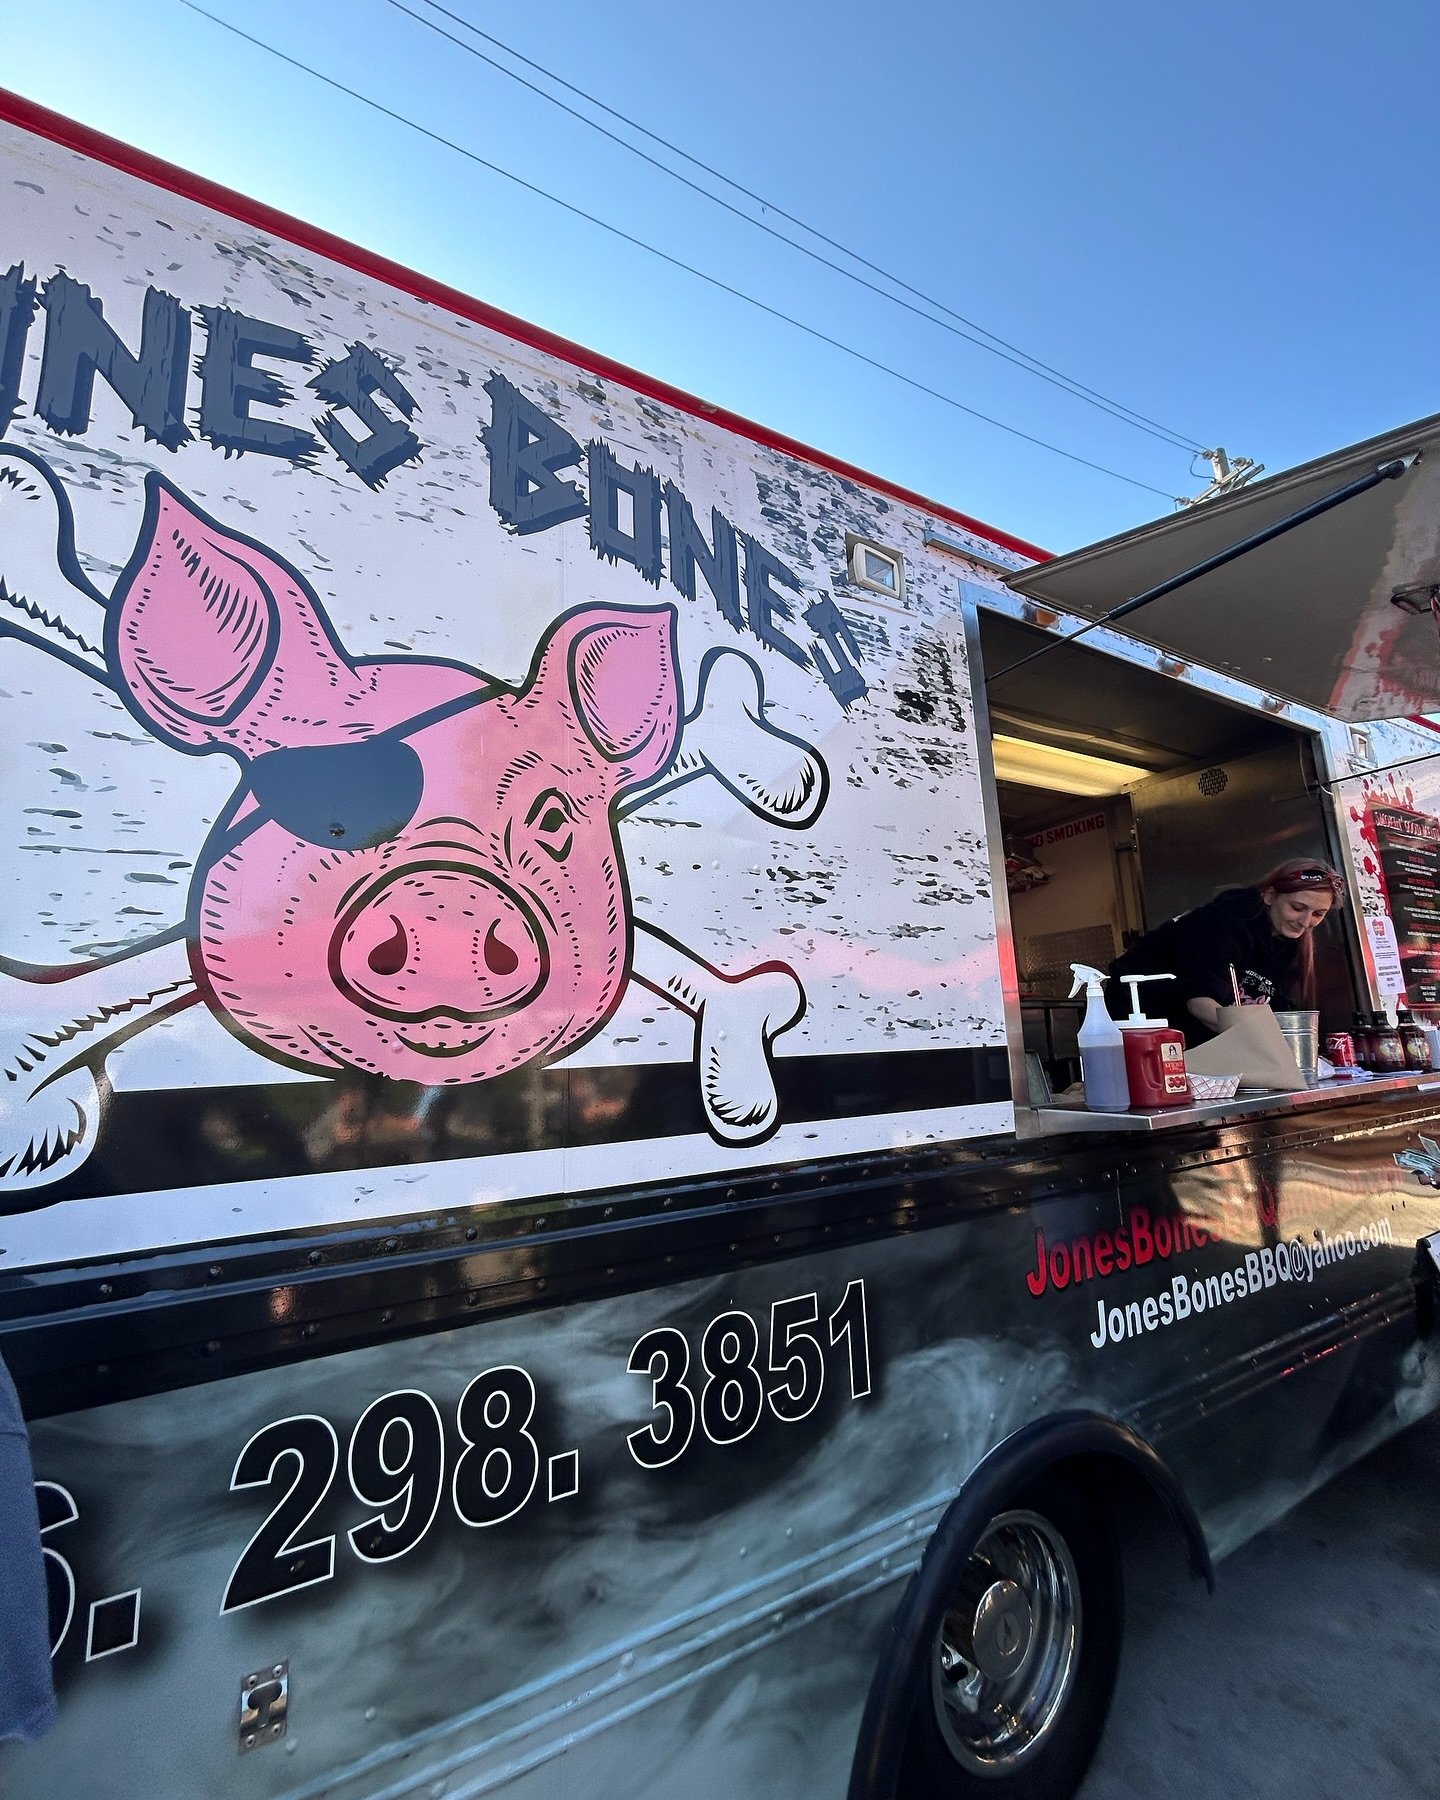 @jonesbonesbbq WITH THE UNANIMOUS VOTE FOR THE PEOPLE!!! Congratulations to all our winners tonight! Thank you to everyone that came out to support a great cause!🐷🤍